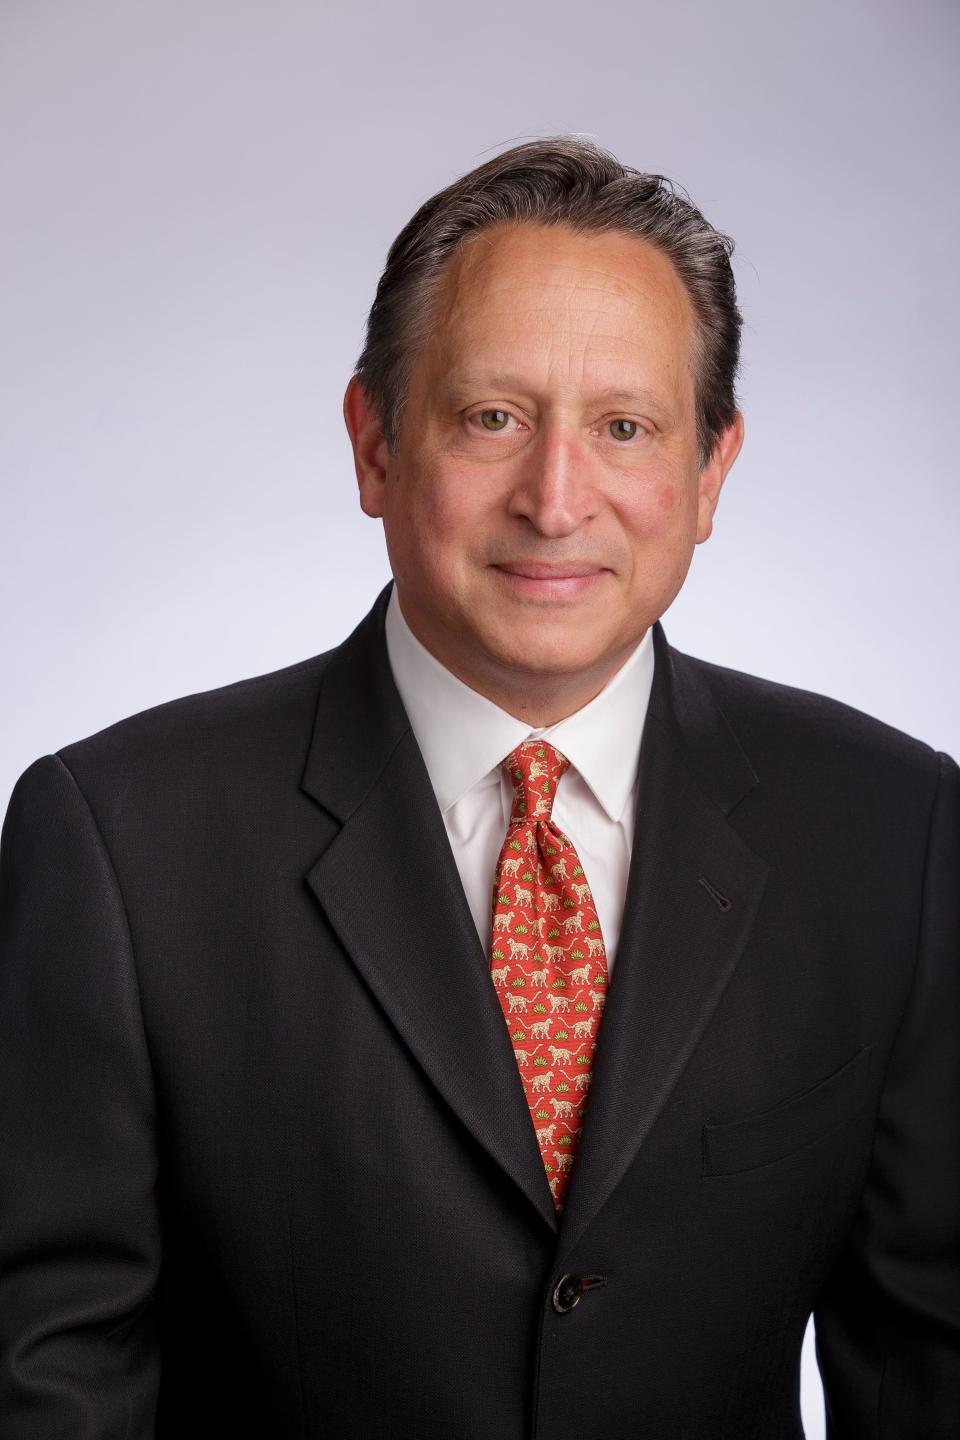 Ronald V. Gallo is the president and CEO of The Community Foundation of Louisville.